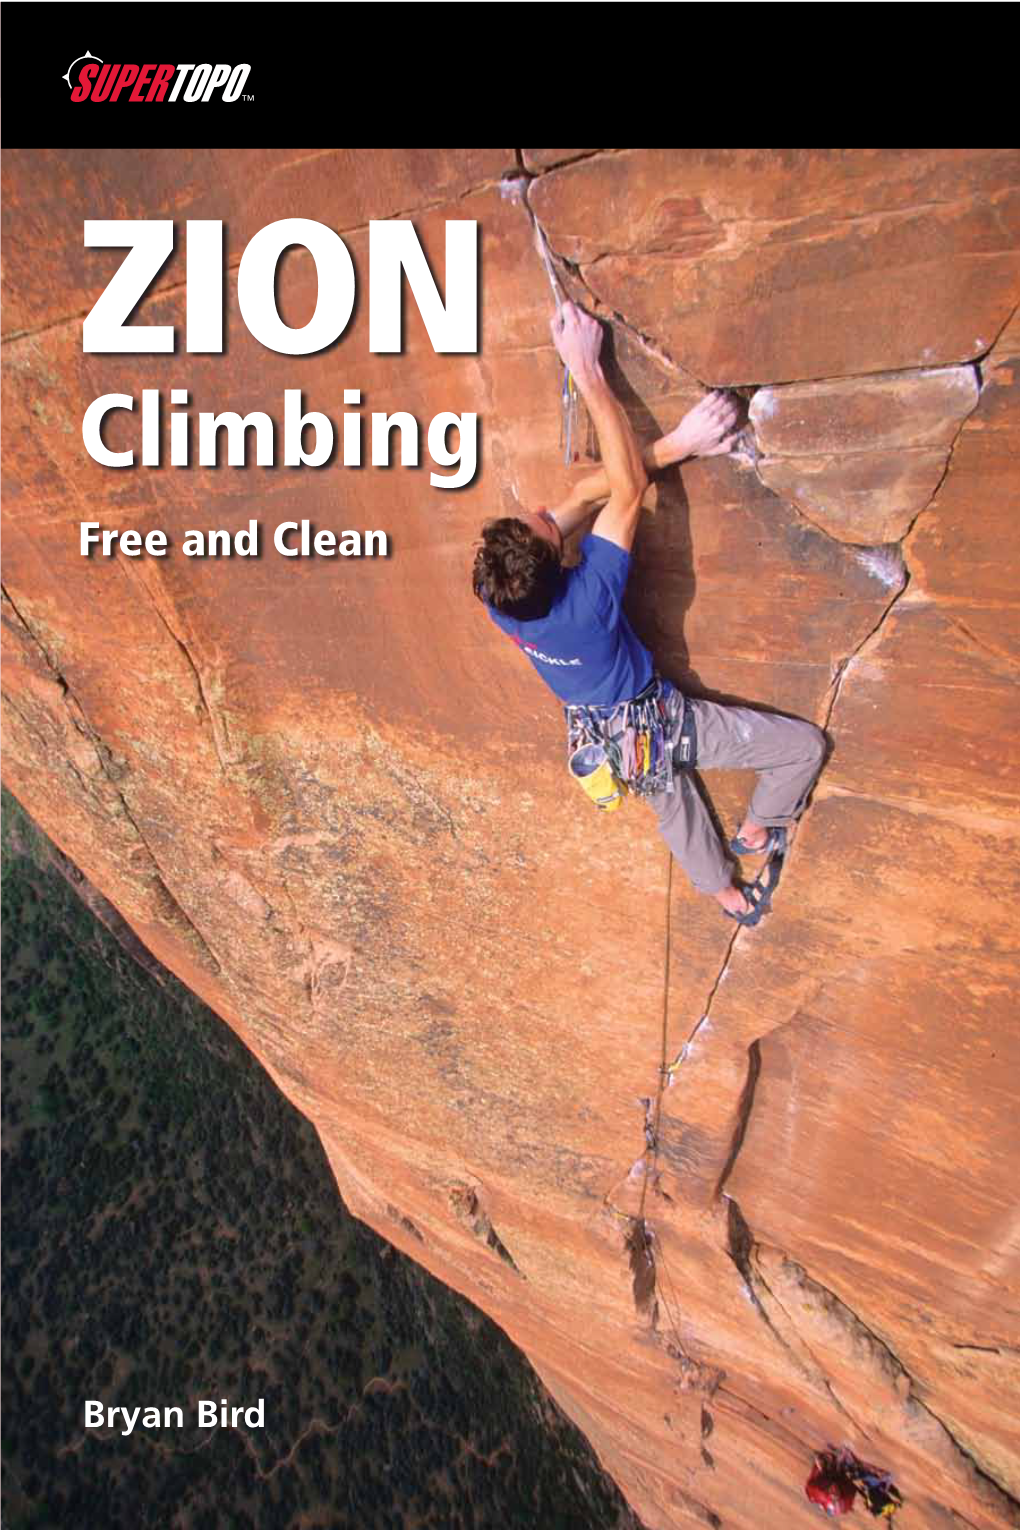 Ing Zion Climbing: Free and Clean